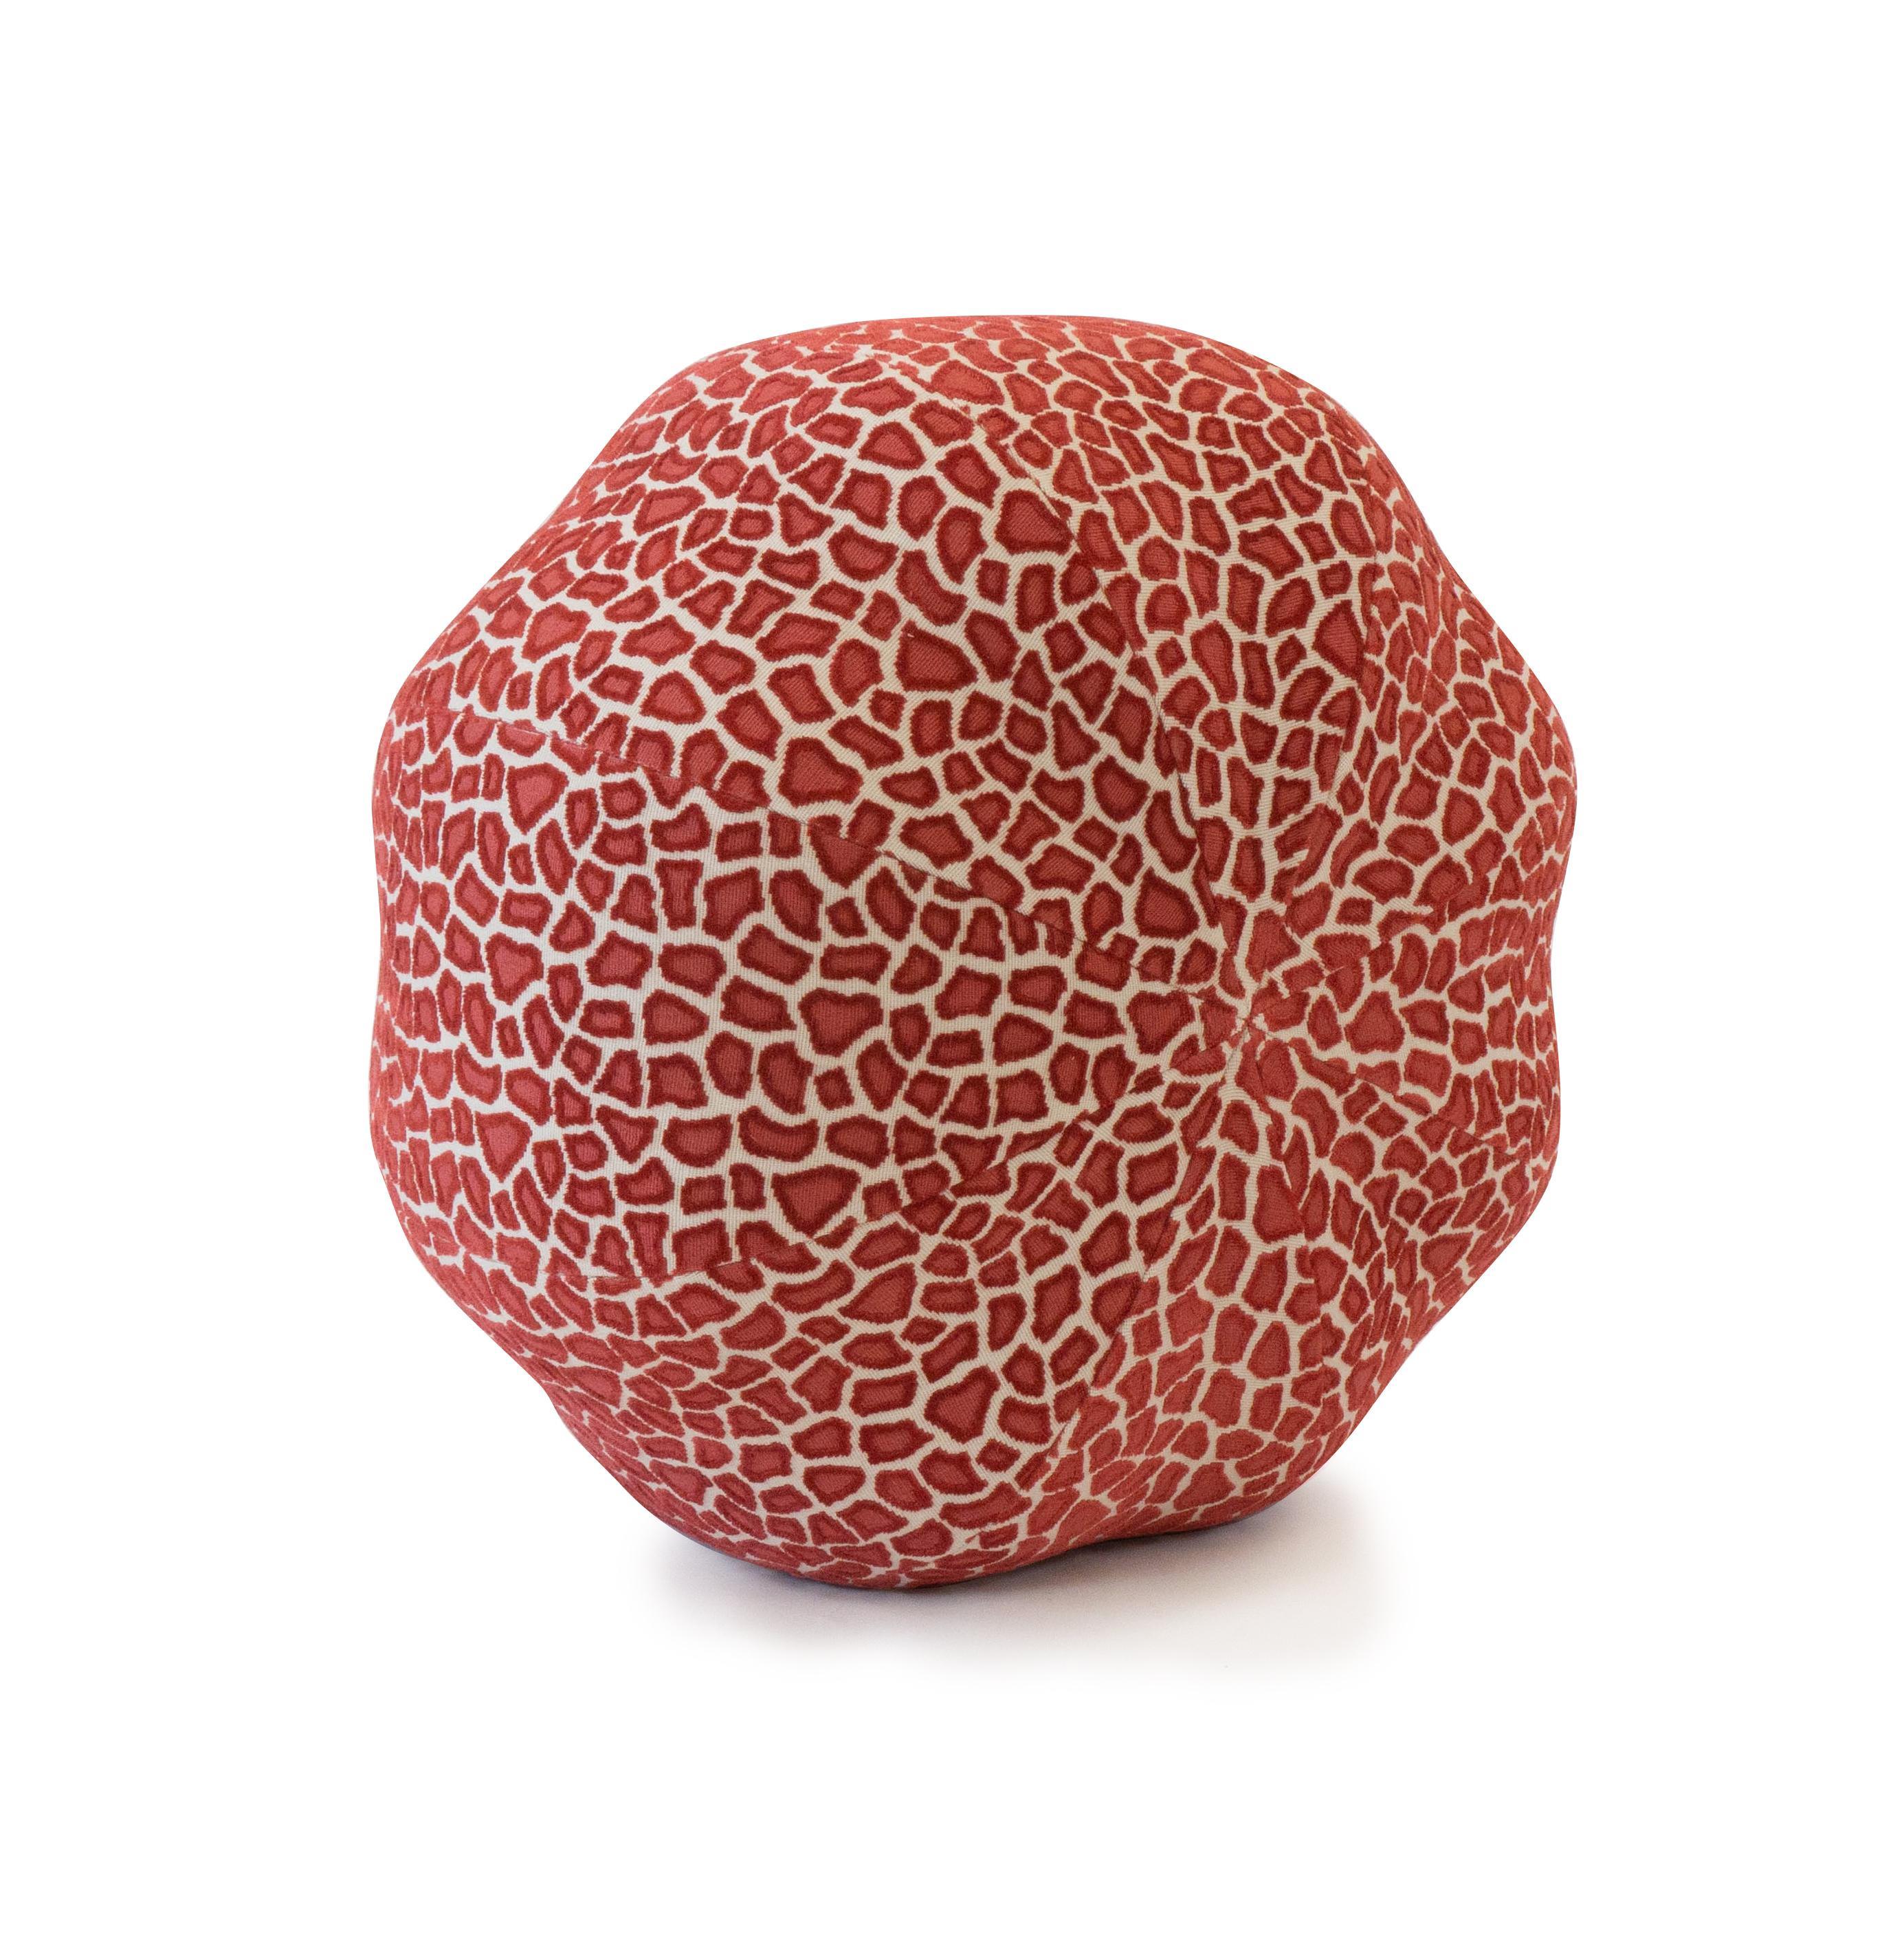 Our Pumpkin pouf is a handmade pouf floor cushion shown in Jim Thompson Wild Thing a red animal print cut velvet. Made in our studio in Norwalk, CT. Customizable upon request.

Measurements:
Overall: 28”D x 19”H

Price As Shown: $1,370 each
COM